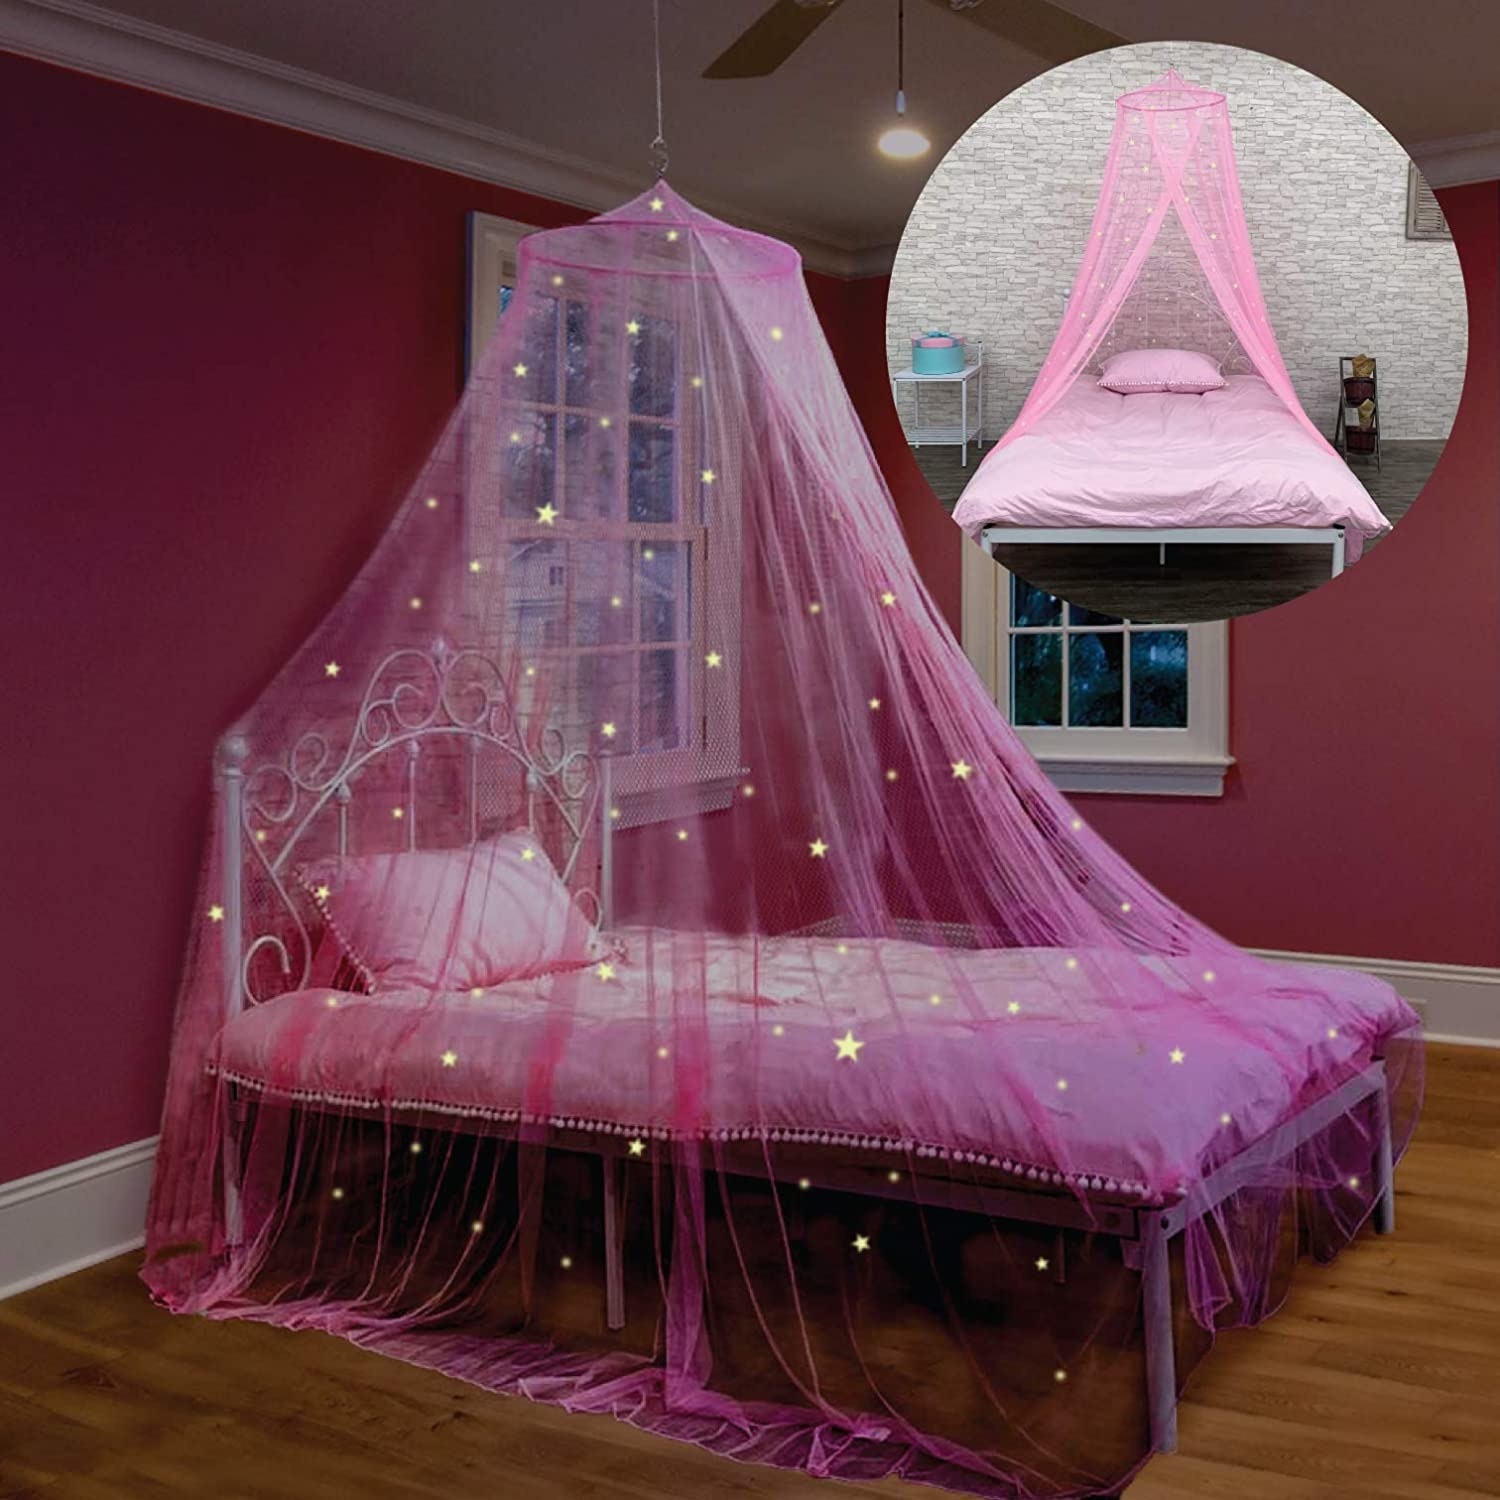 a bed with the canopy installed above; glow in the dark stars are visible on it